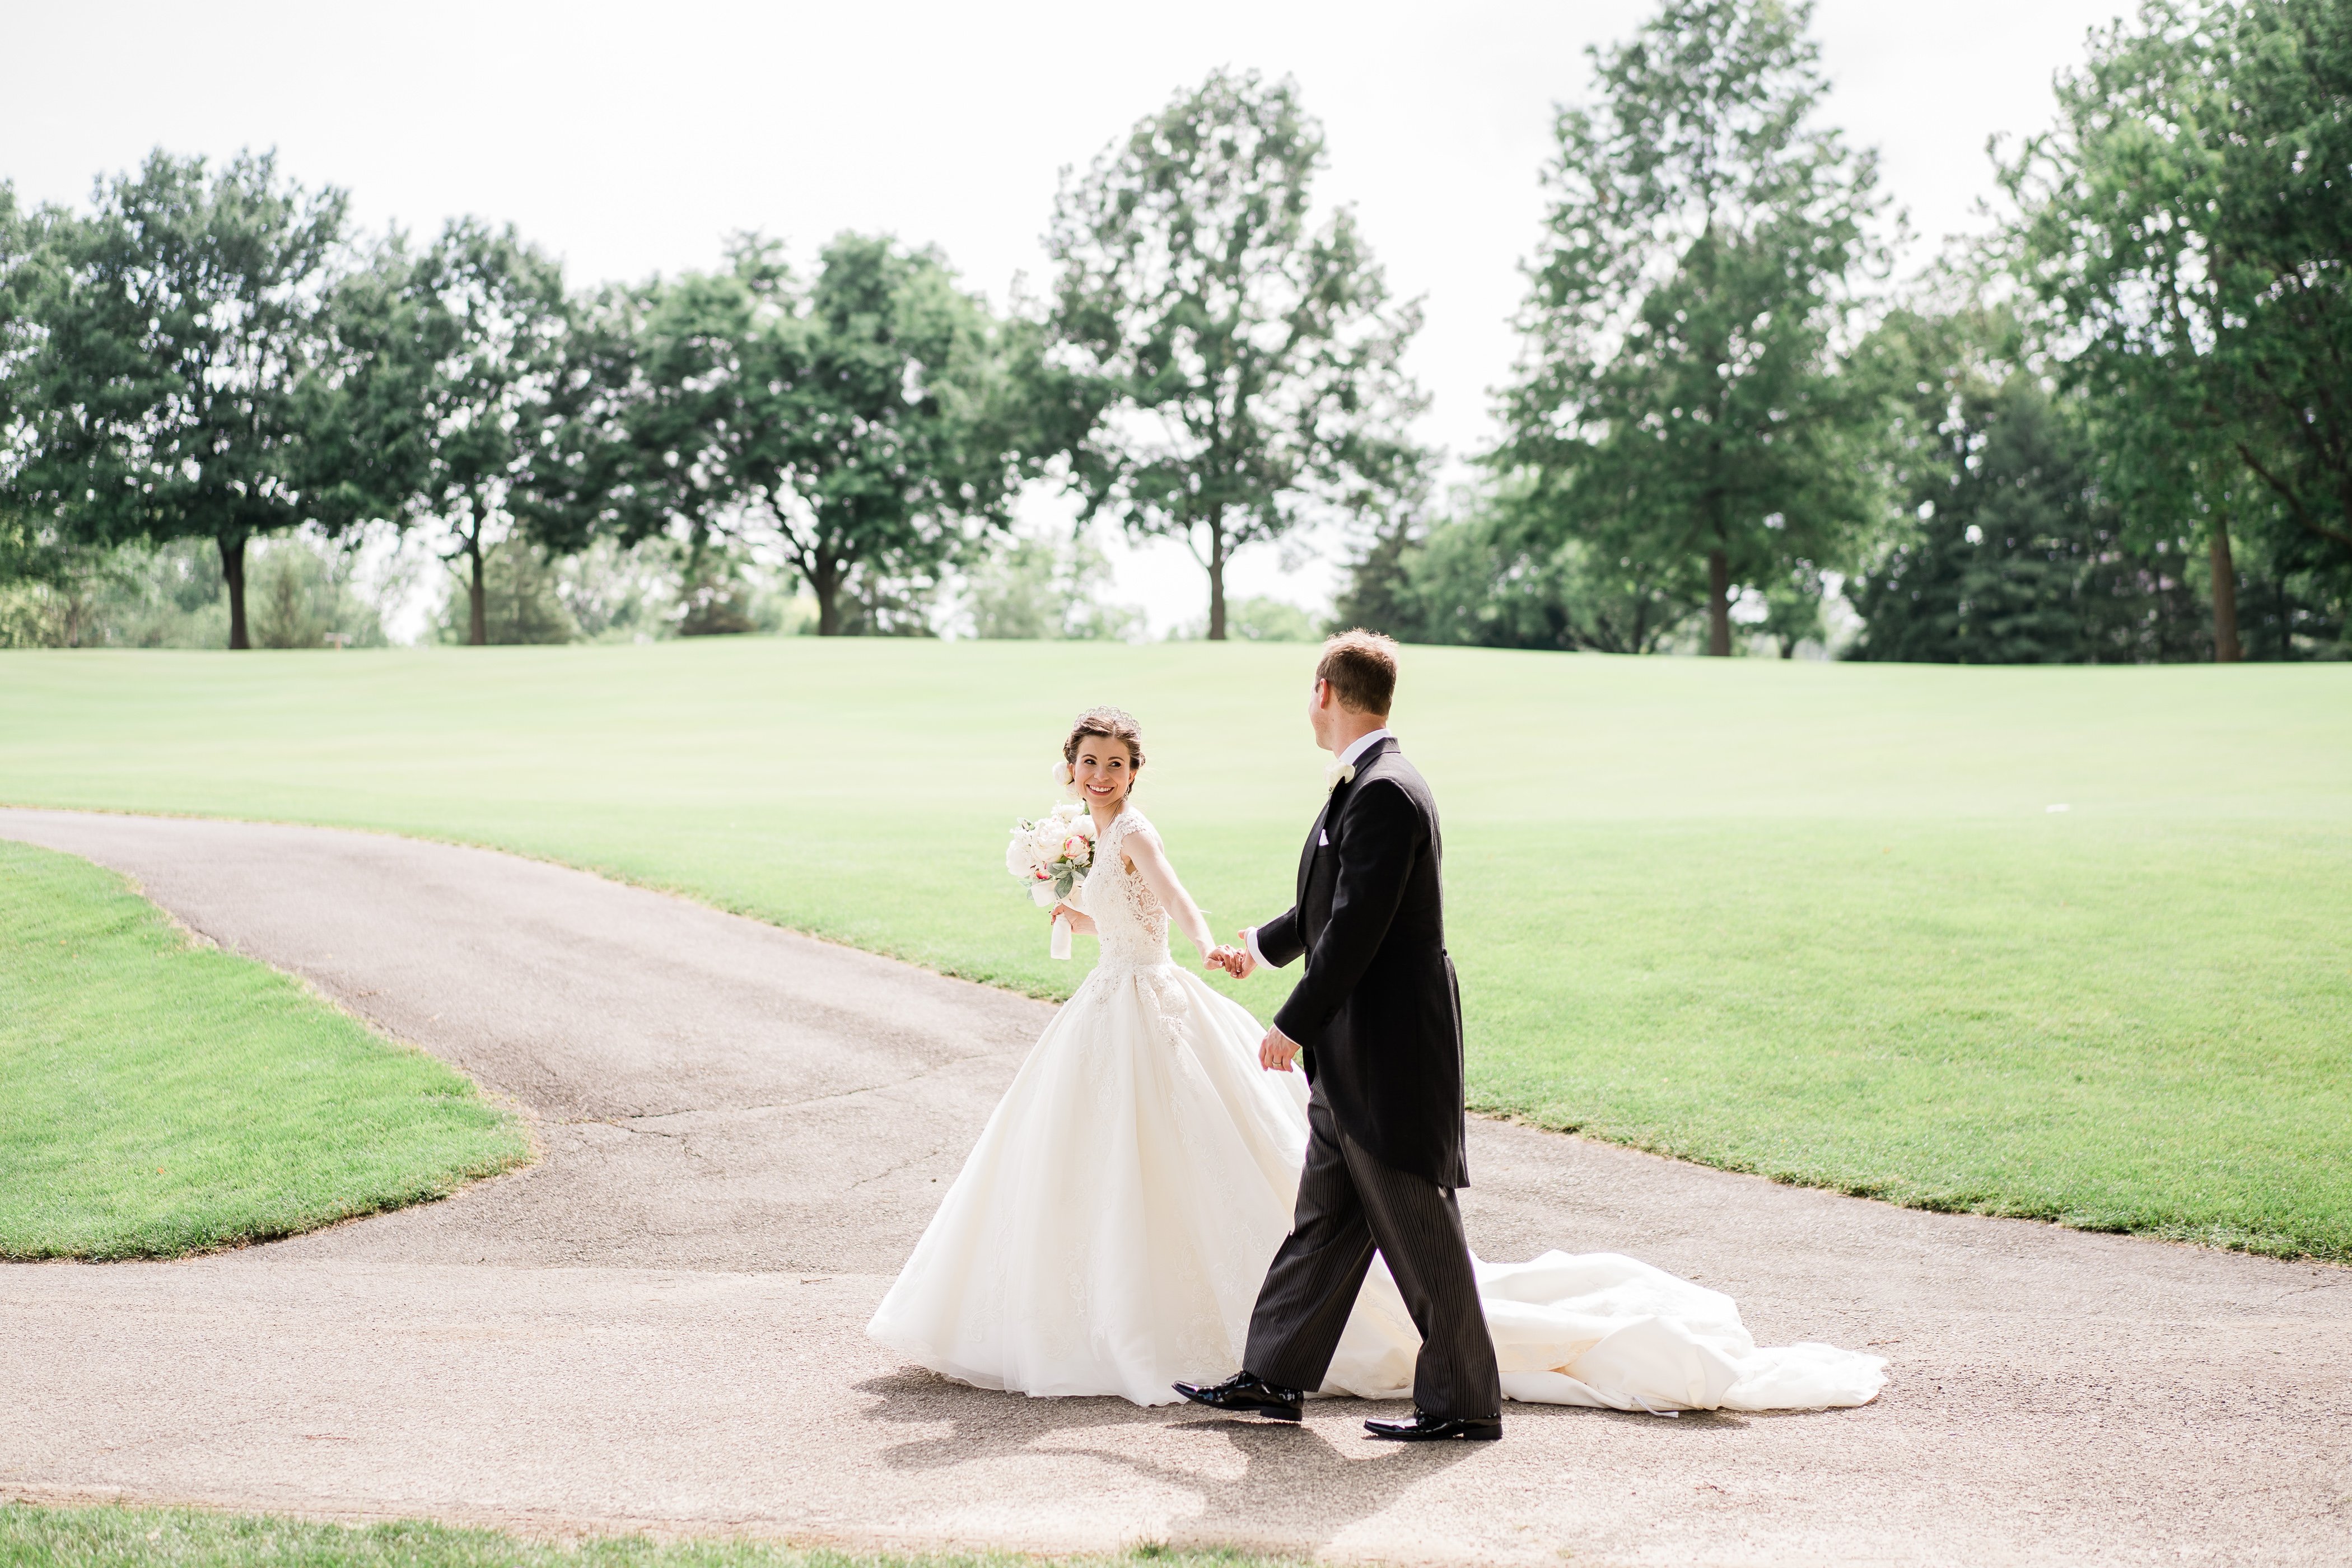 summer outdoor wedding with bride and groom holding hands and walking along a dirt path together on a golf course wedding venue 